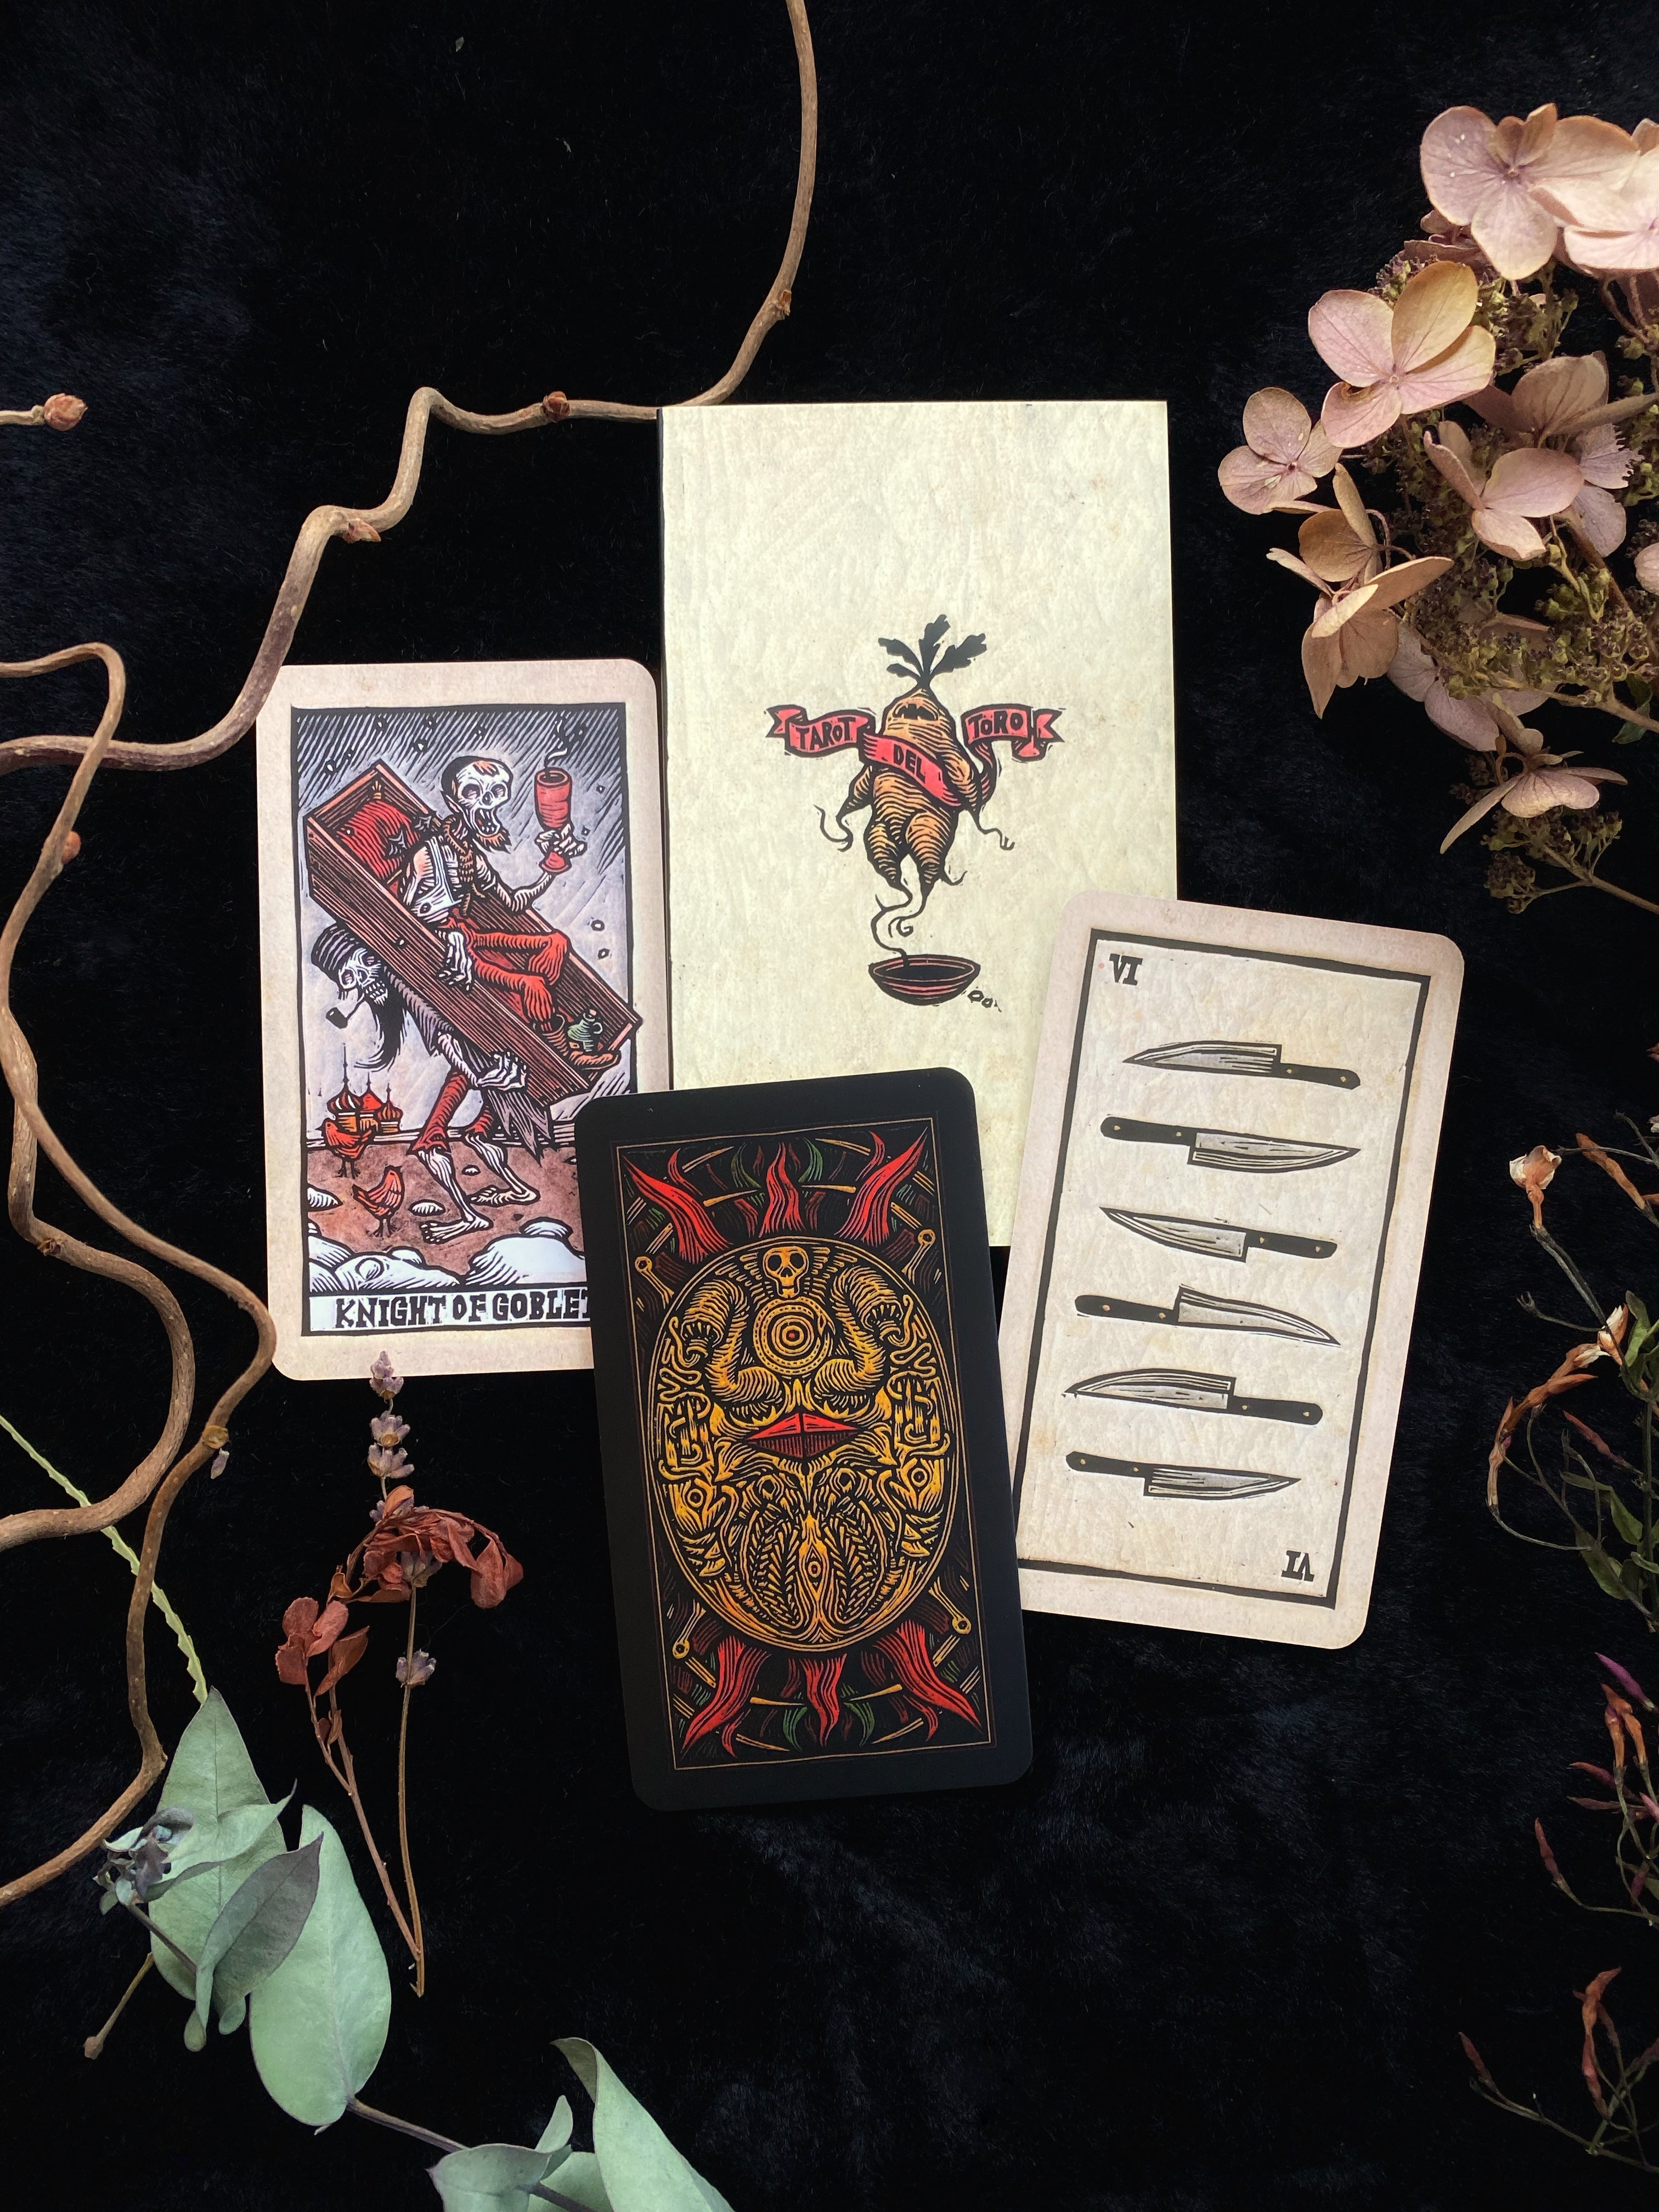 Tarot del Toro: A Tarot Deck and Guidebook Inspired by the World of Guillermo del Toro